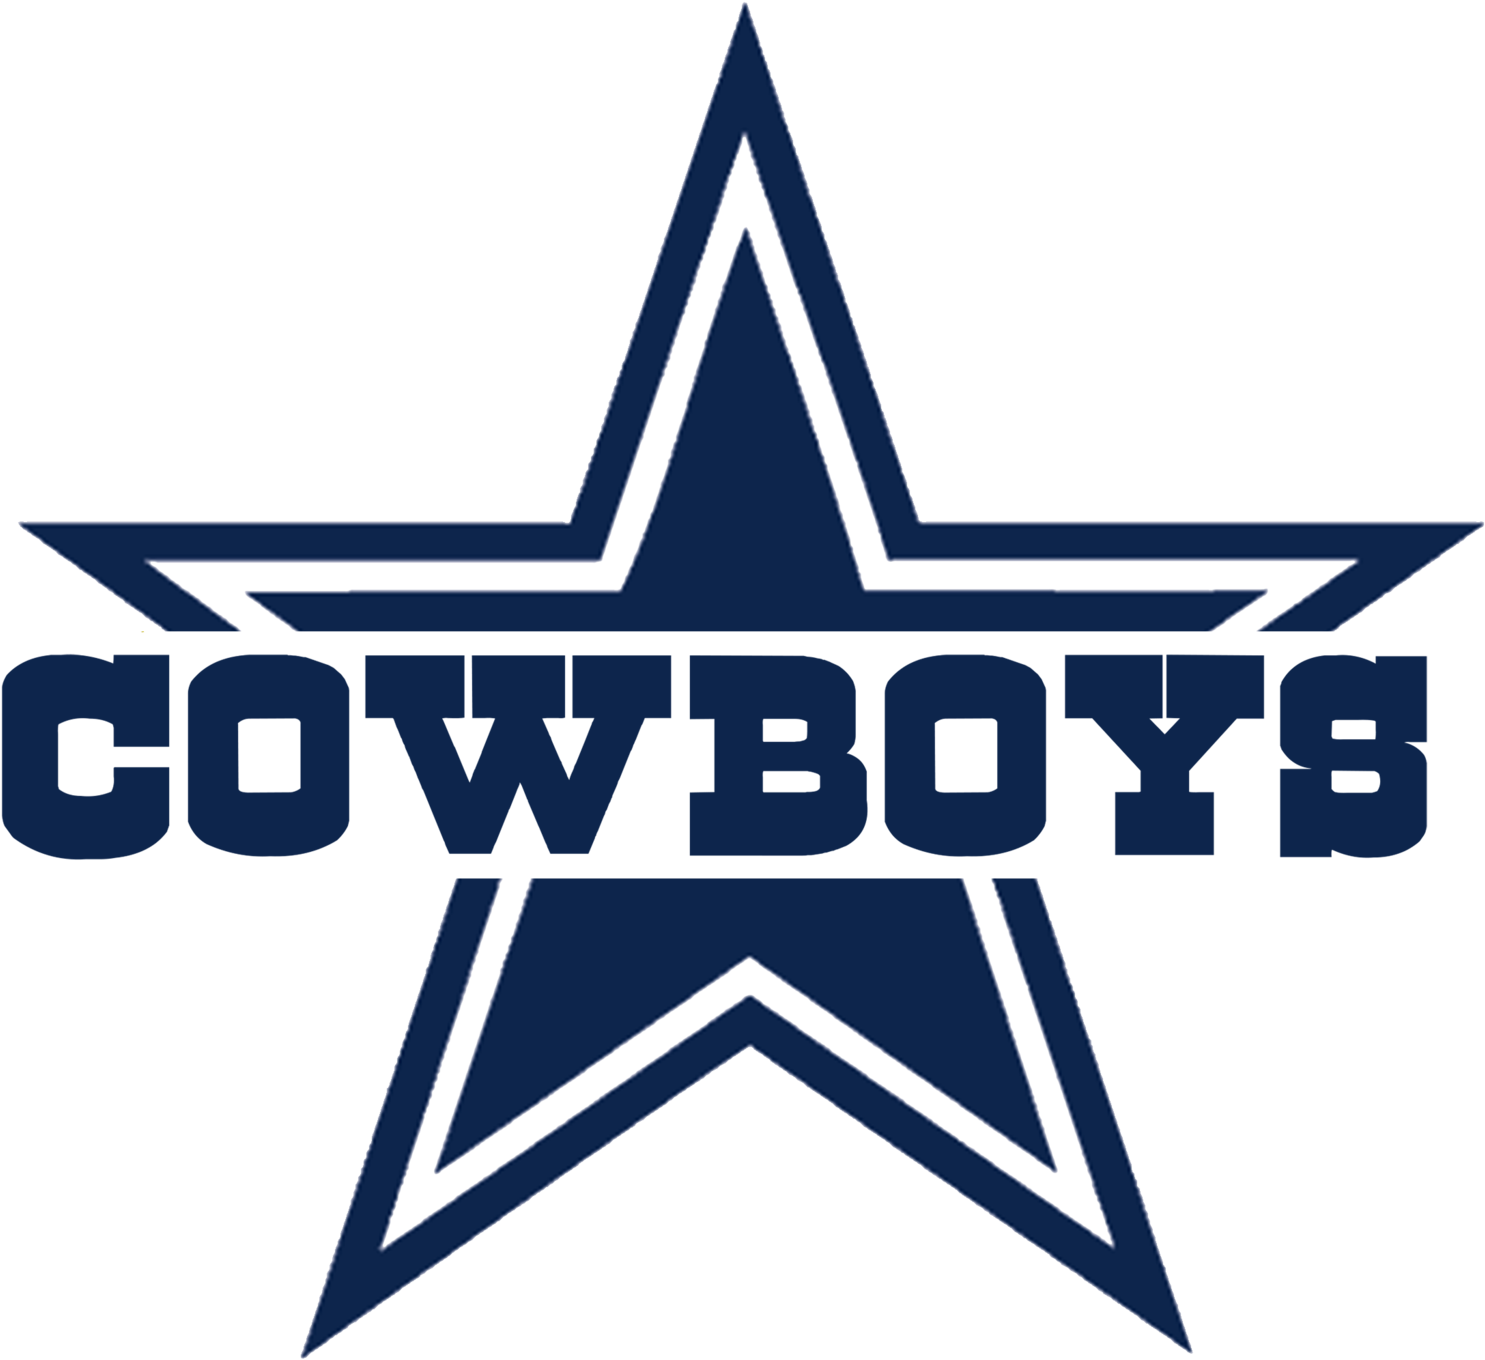 Dallas Cowboys Logo PNG Clipart Background | PNG Play